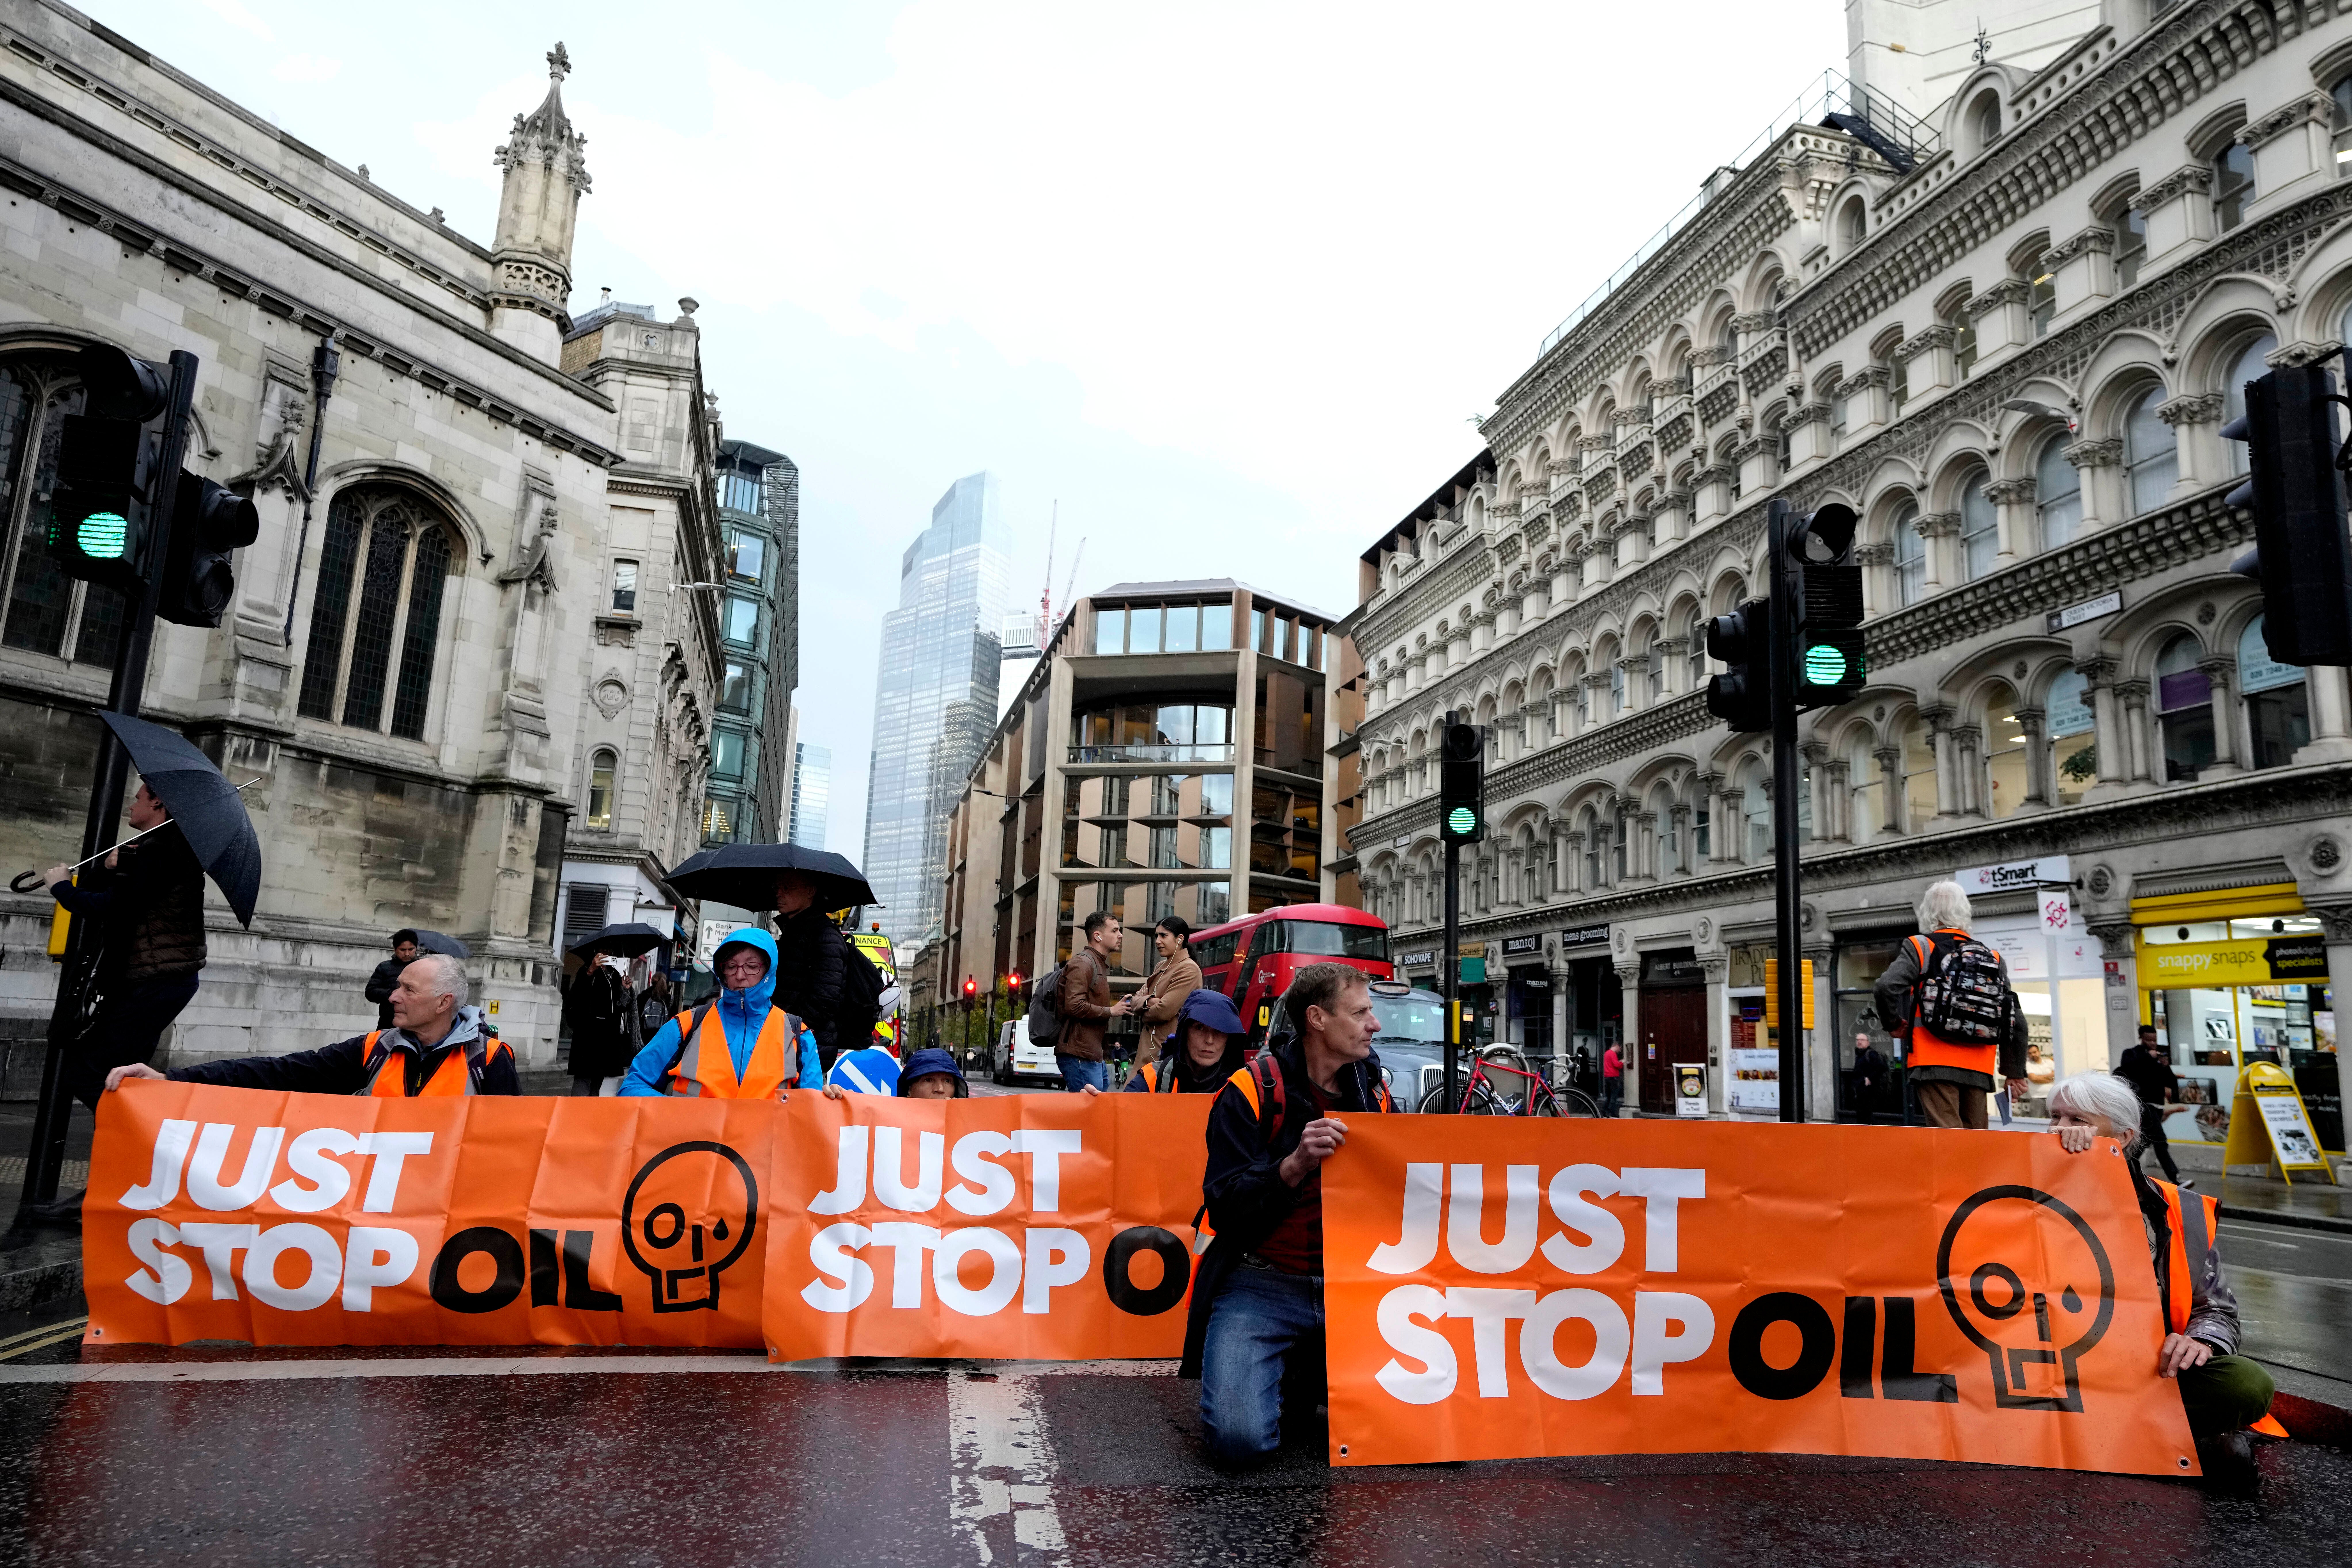 This is the one simple demand of Just Stop Oil – that the UK government bans all new fossil fuel projects